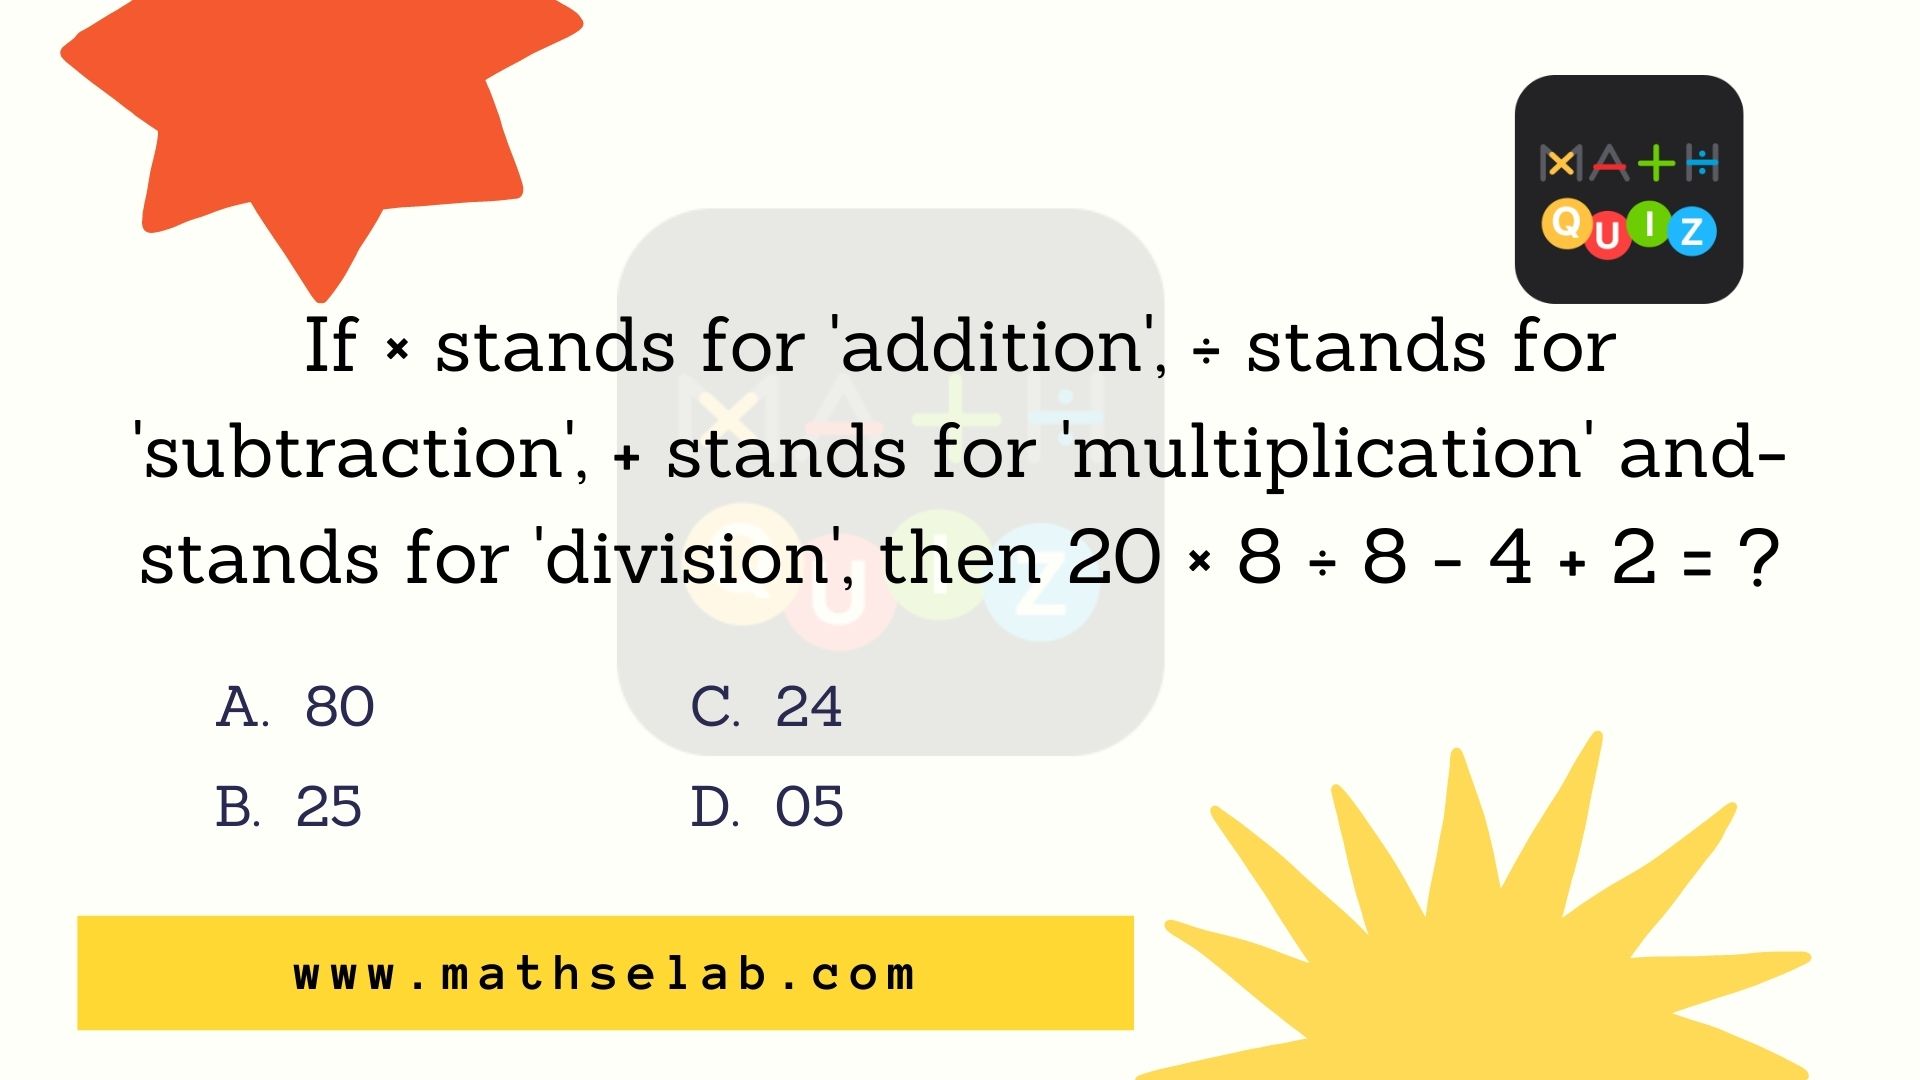 If × stands for 'addition', ÷ stands for 'subtraction', + stands for 'multiplication' and - stands for 'division', then 20 × 8 ÷ 8 - 4 + 2 = ?